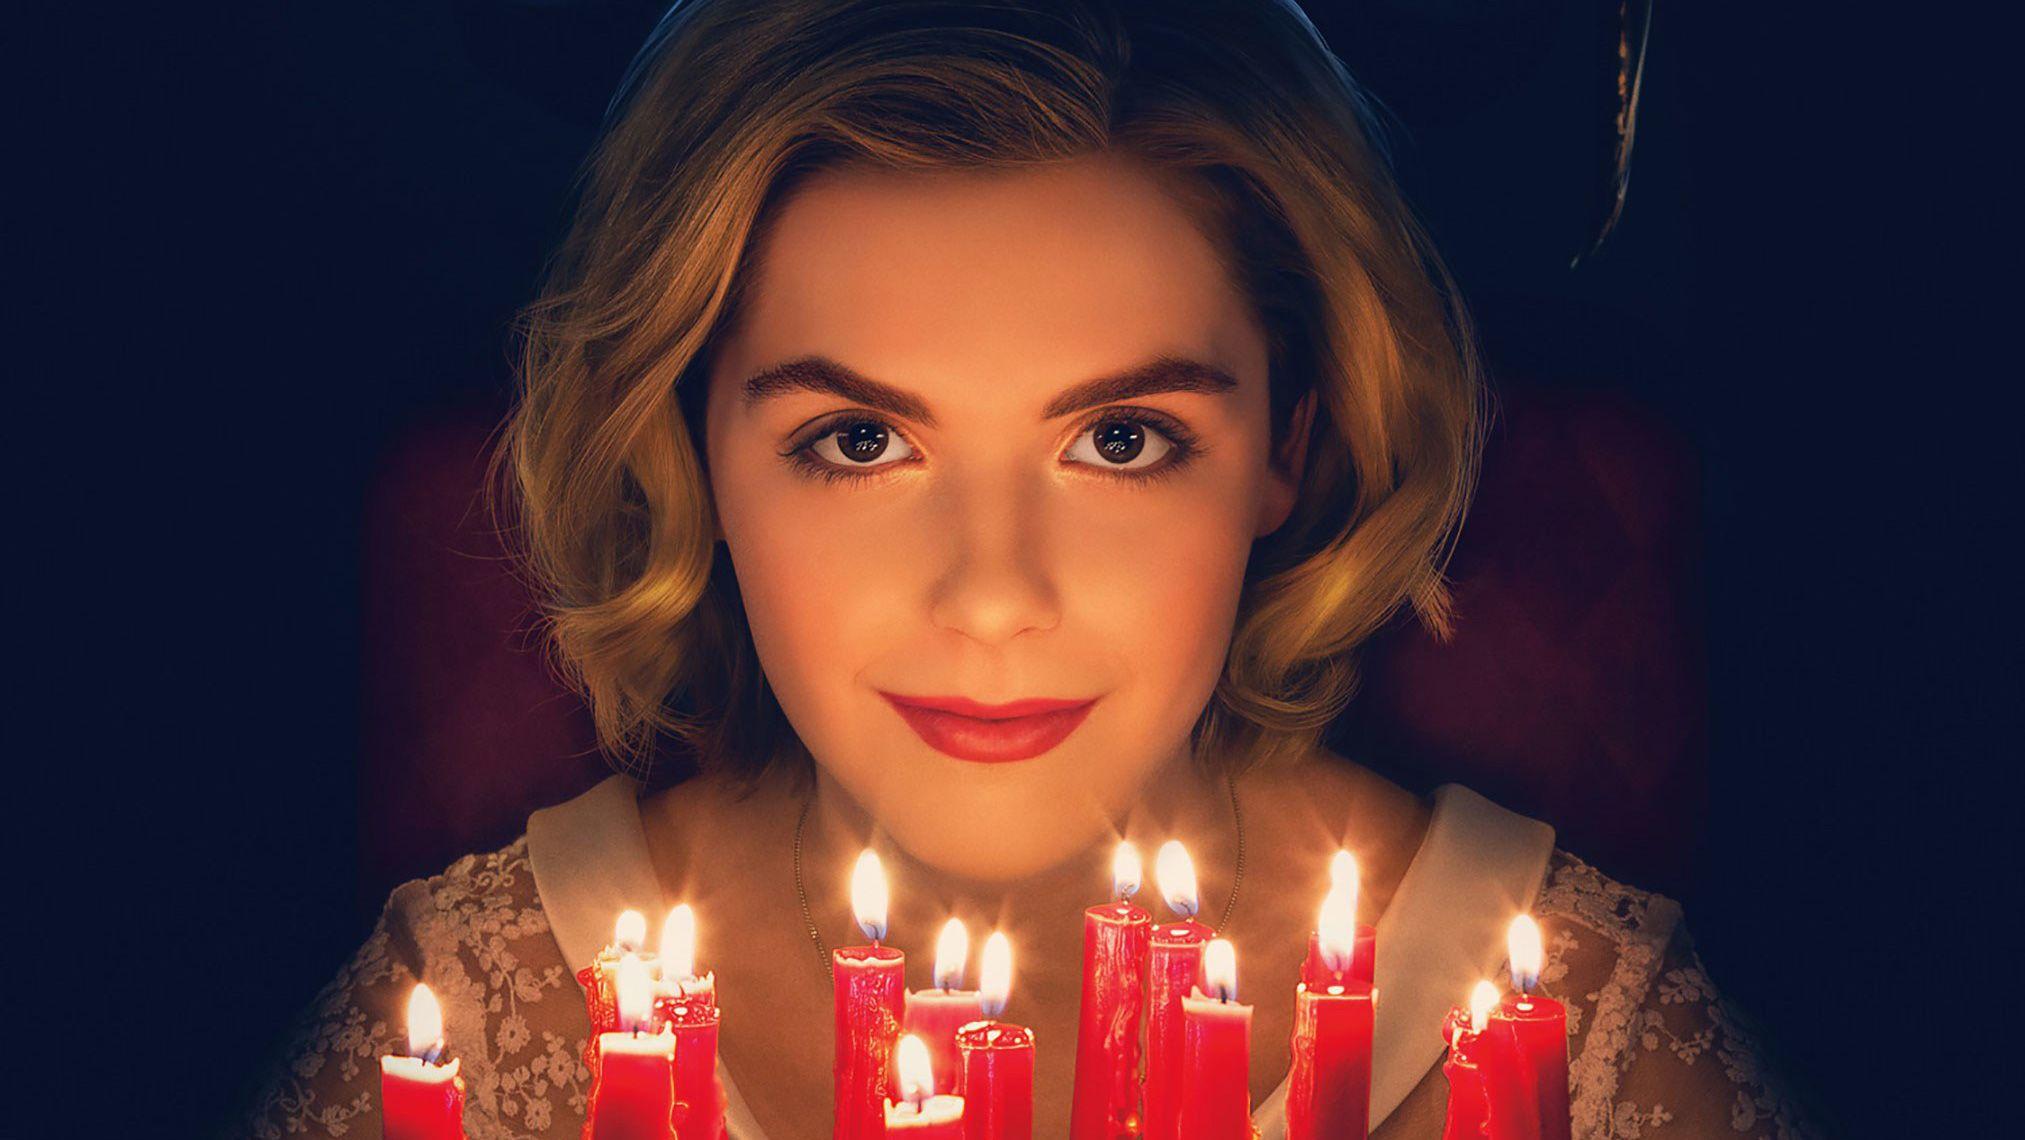 2025x1140 The Chilling Adventures Of Sabrina 2018 Poster, HD Tv Shows